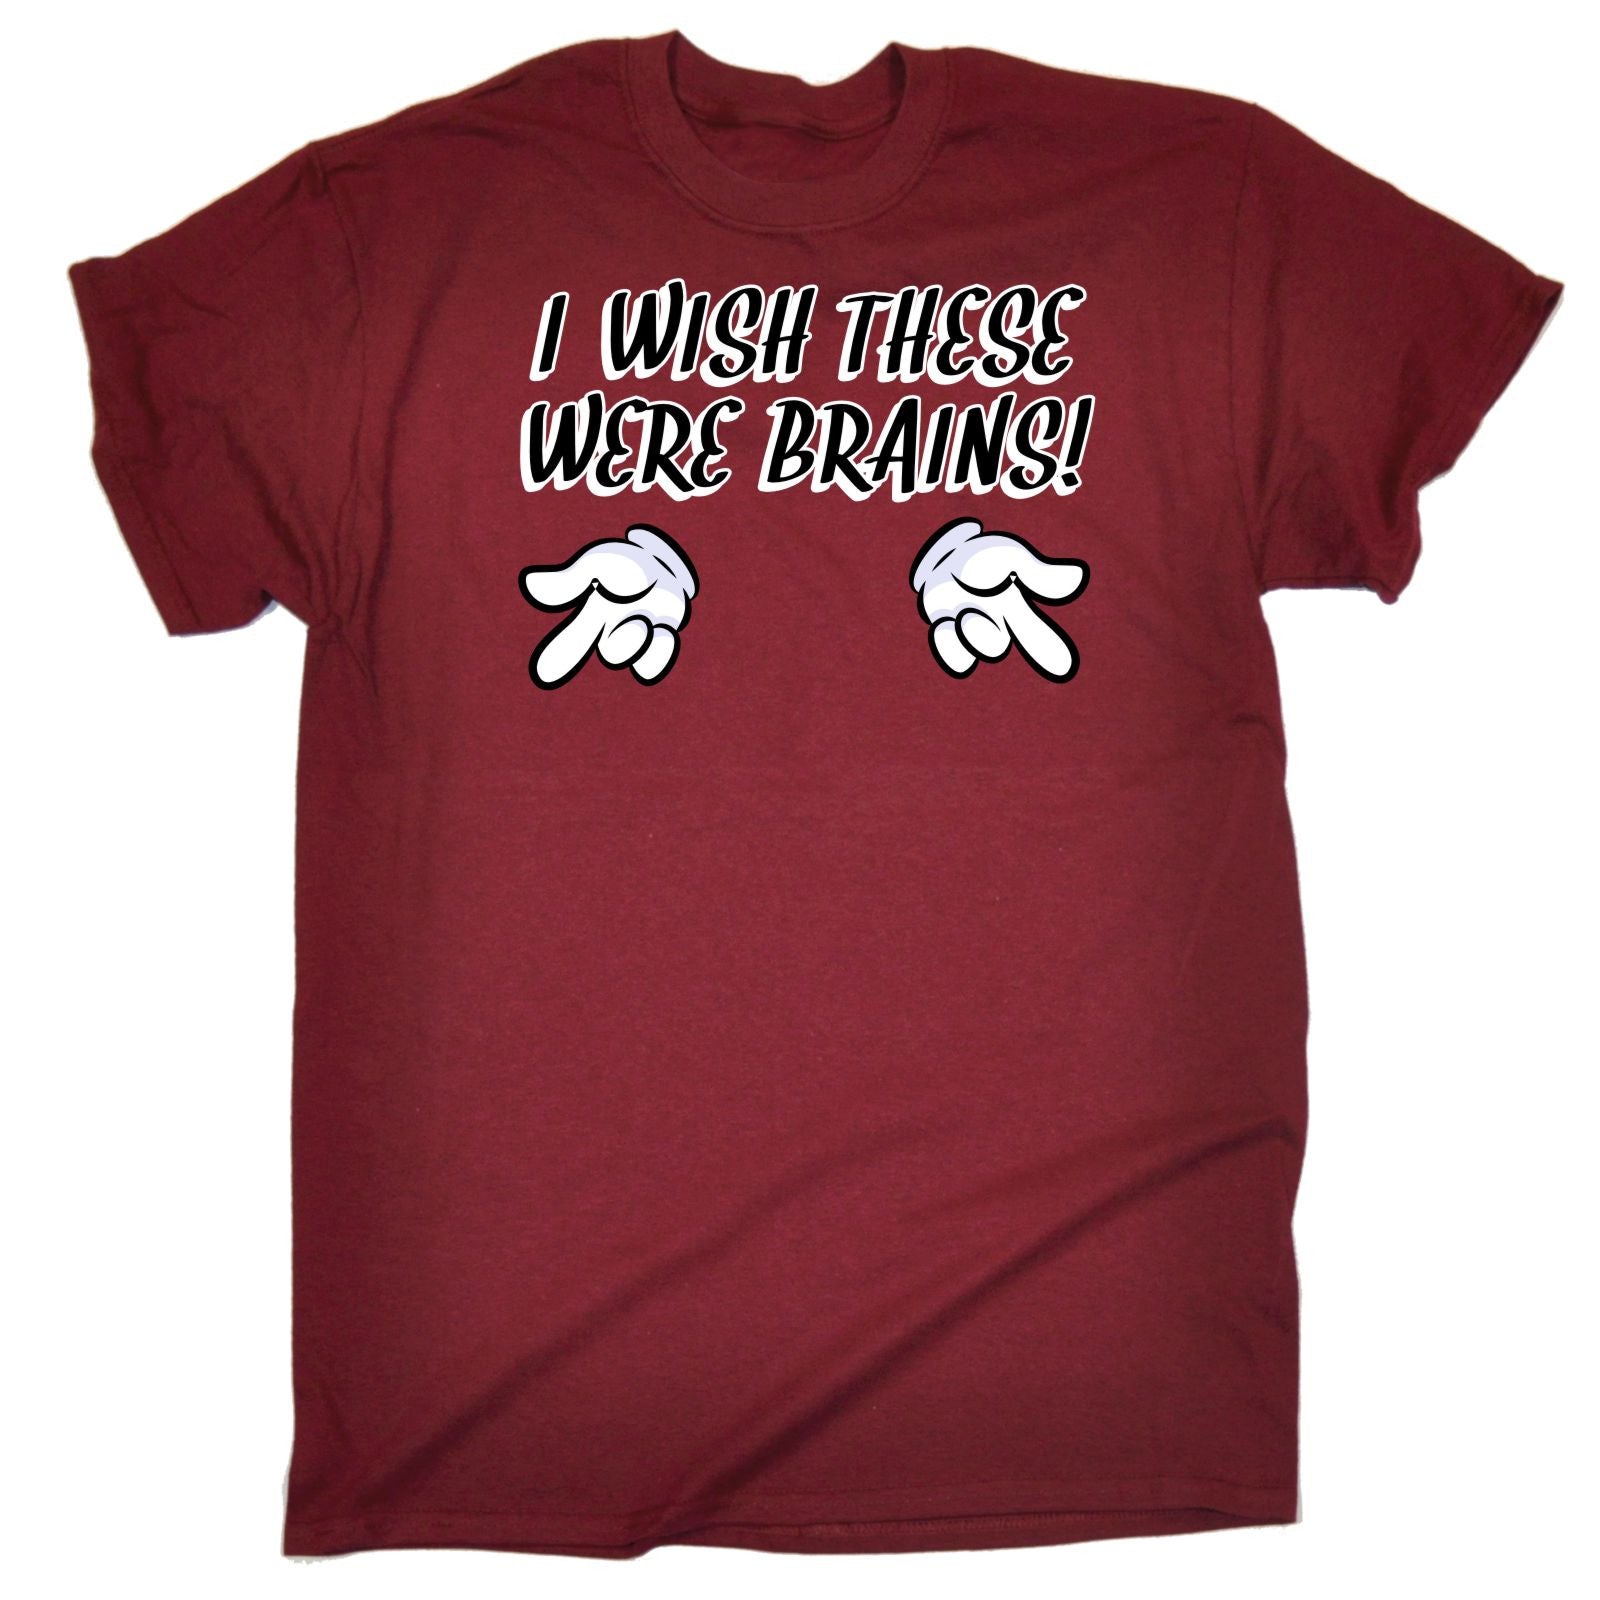 I Wish These Were Brains T Shirt Boobs Naughty Adult Top Funny Birthday